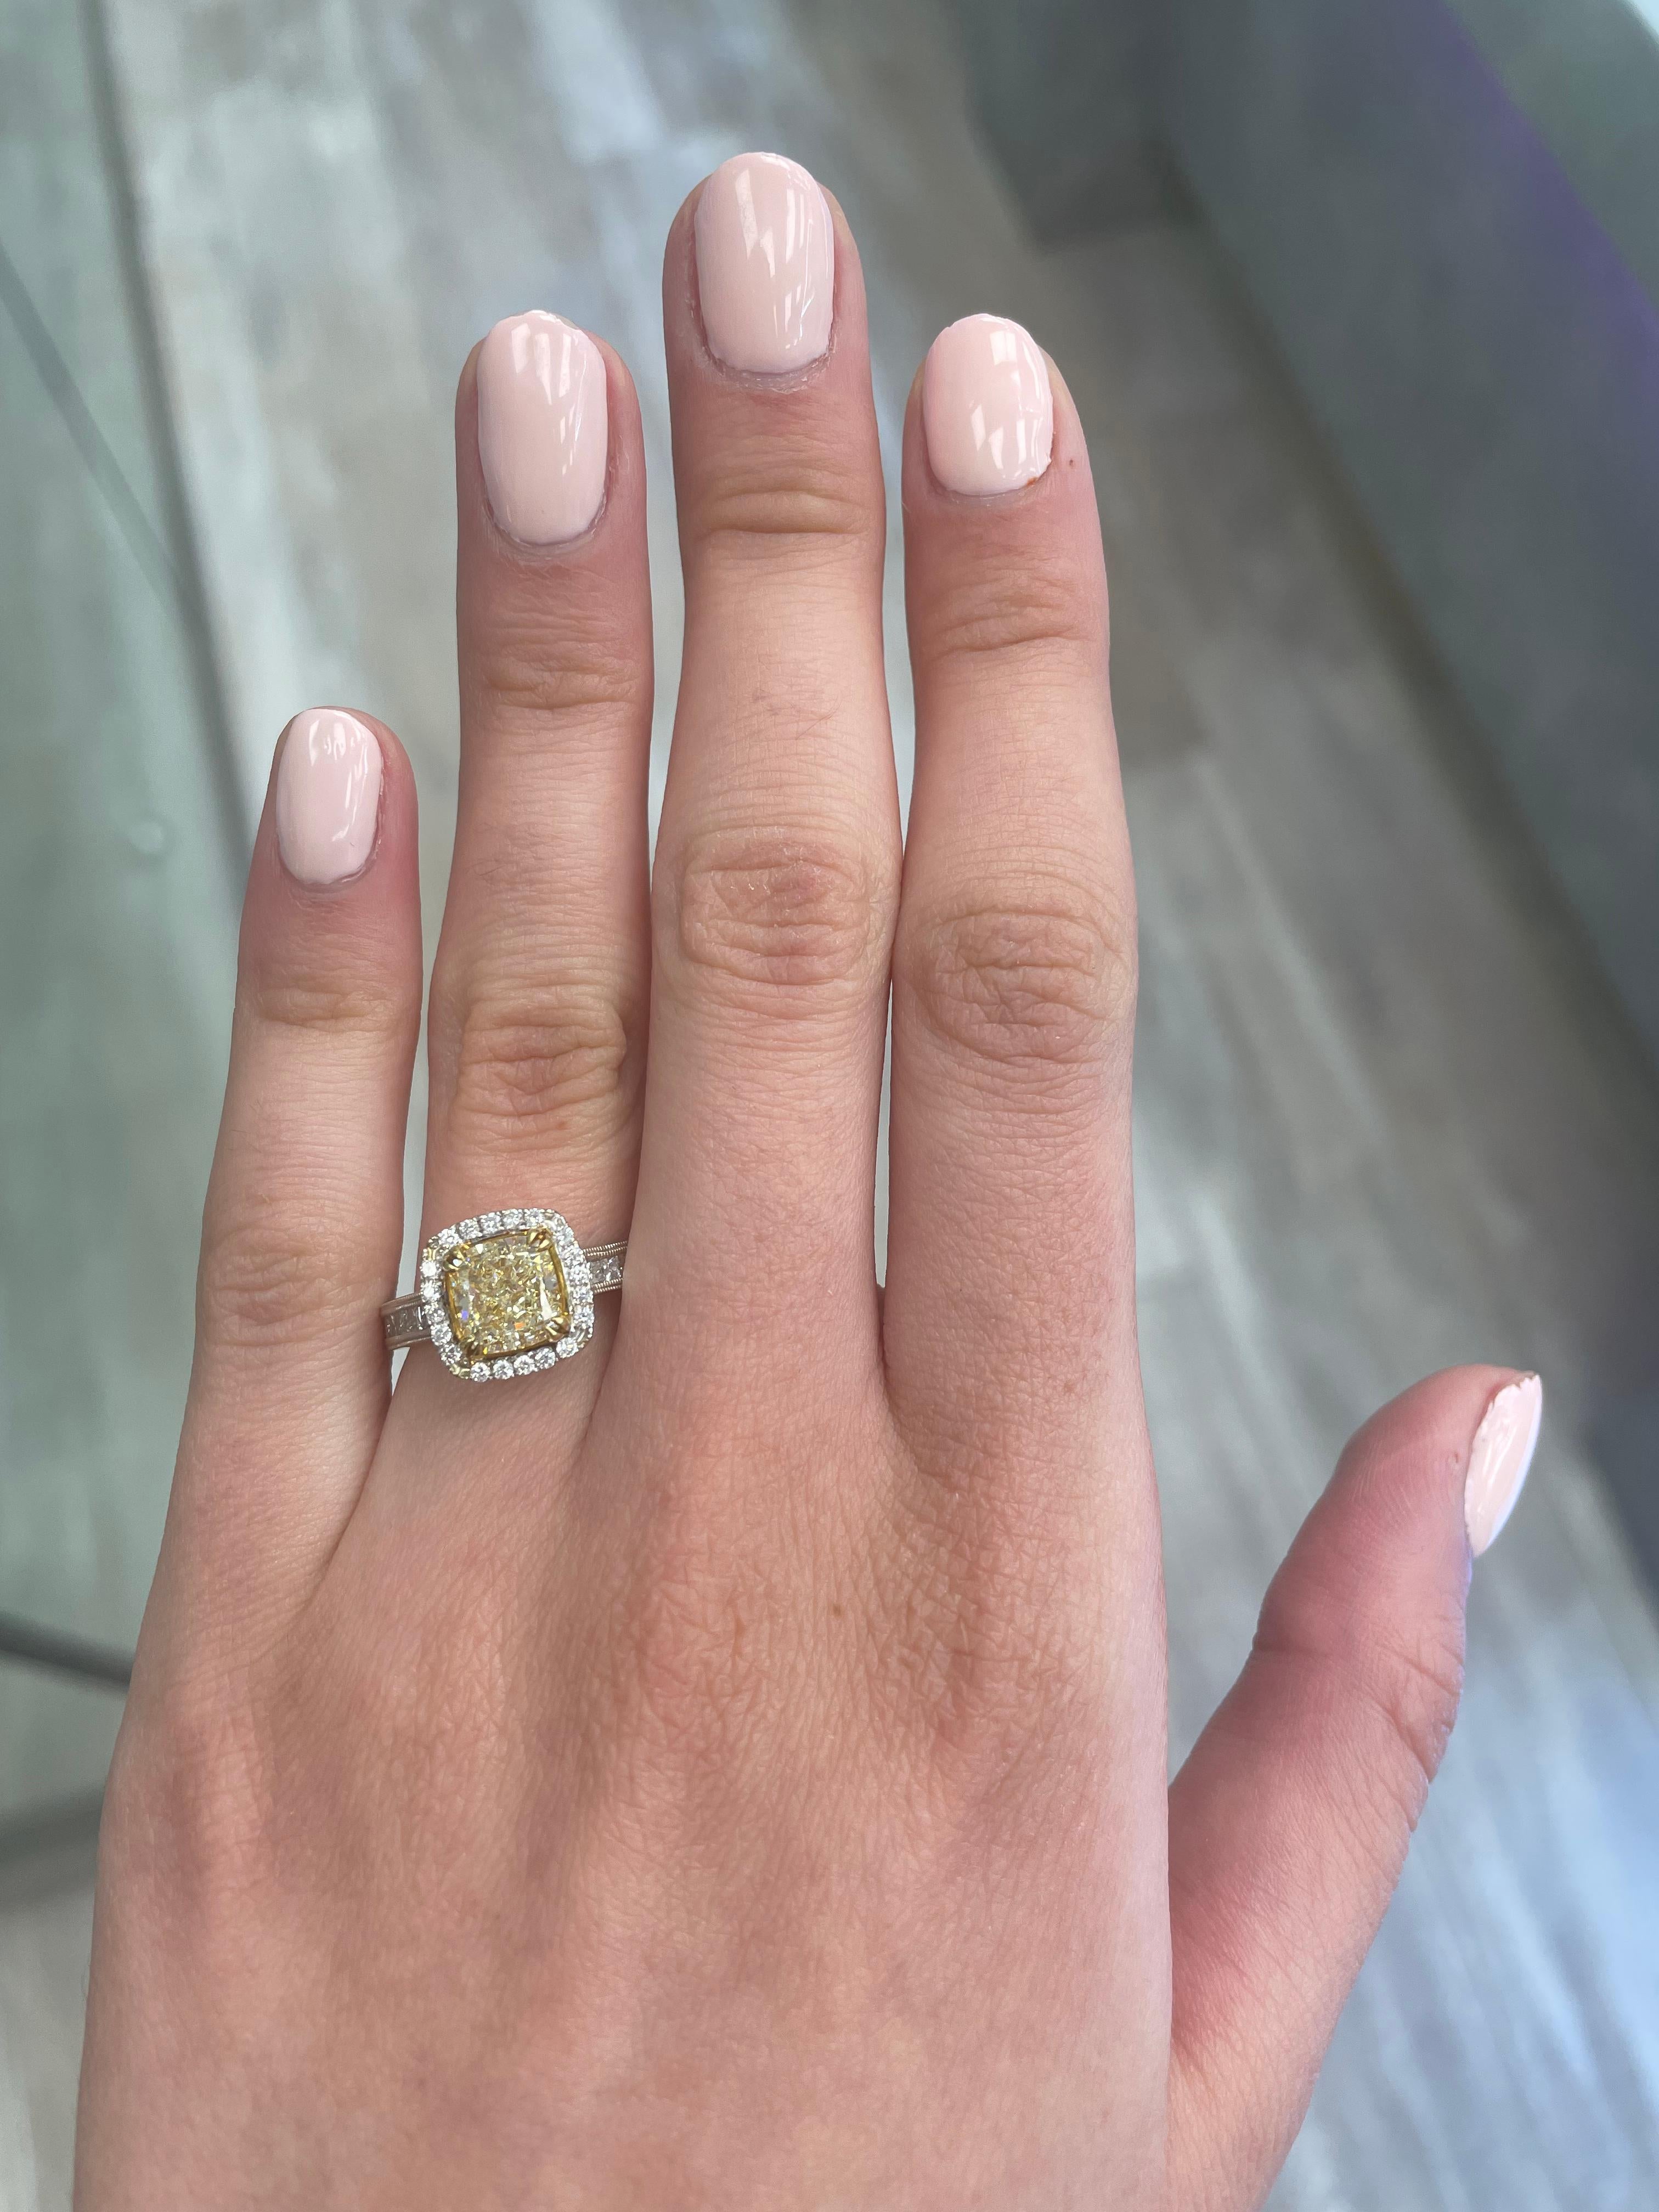 Stunning modern EGL certified yellow diamond with halo ring, two-tone 18k yellow and white gold, twisted shank. By Alexander Beverly Hills
2.61 carats total diamond weight.
2.03 carat cushion cut Fancy Intense Yellow color and SI1 clarity diamond,